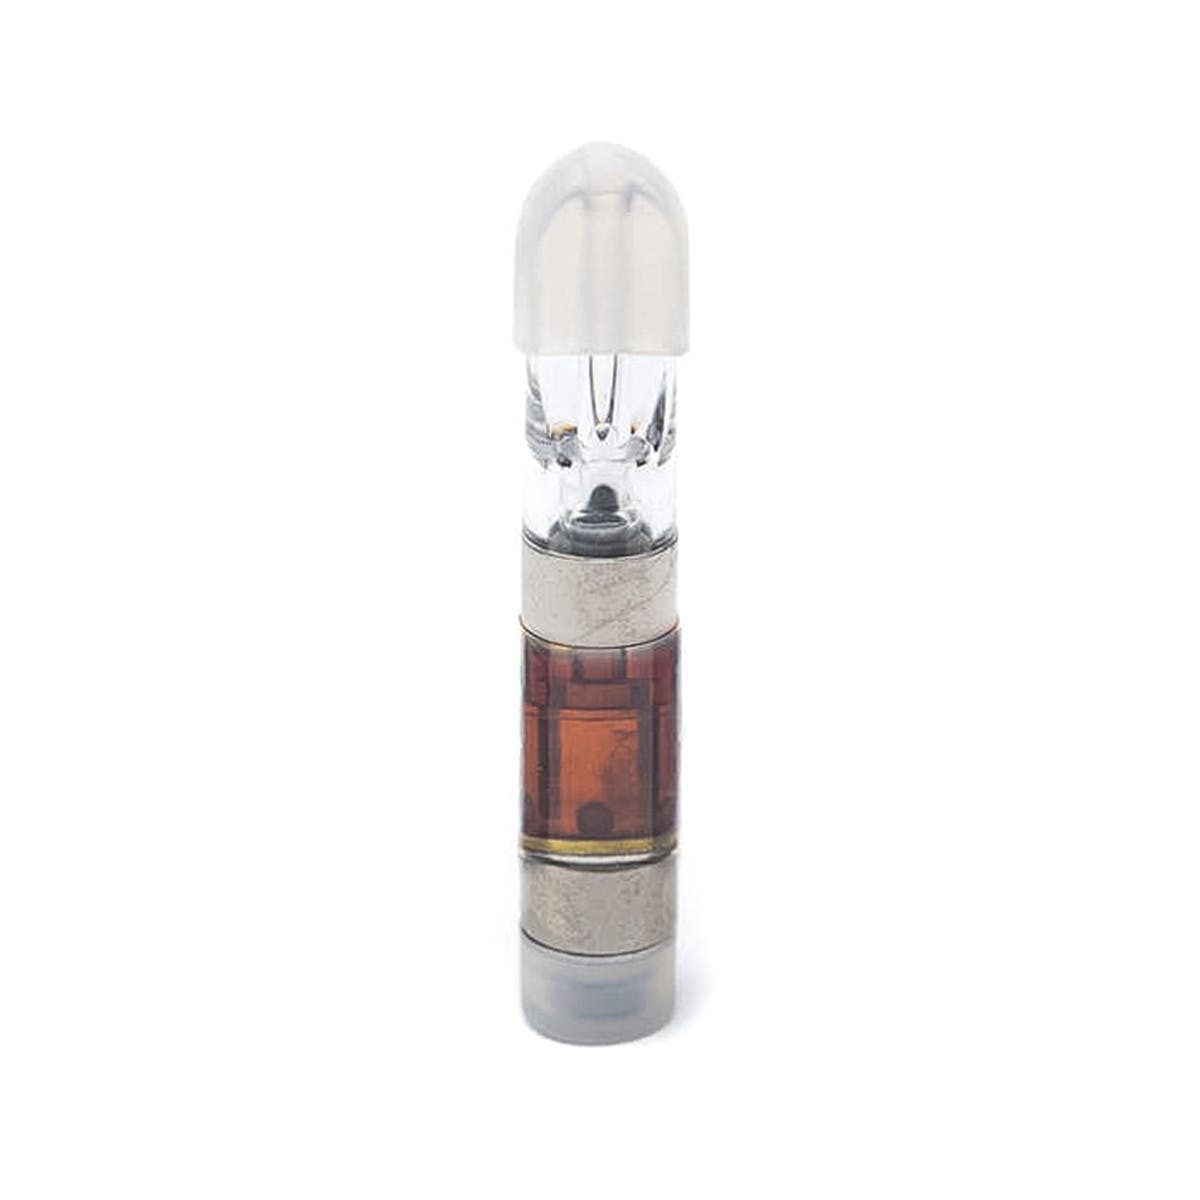 concentrate-wellness-connection-down-east-vape-cartridge